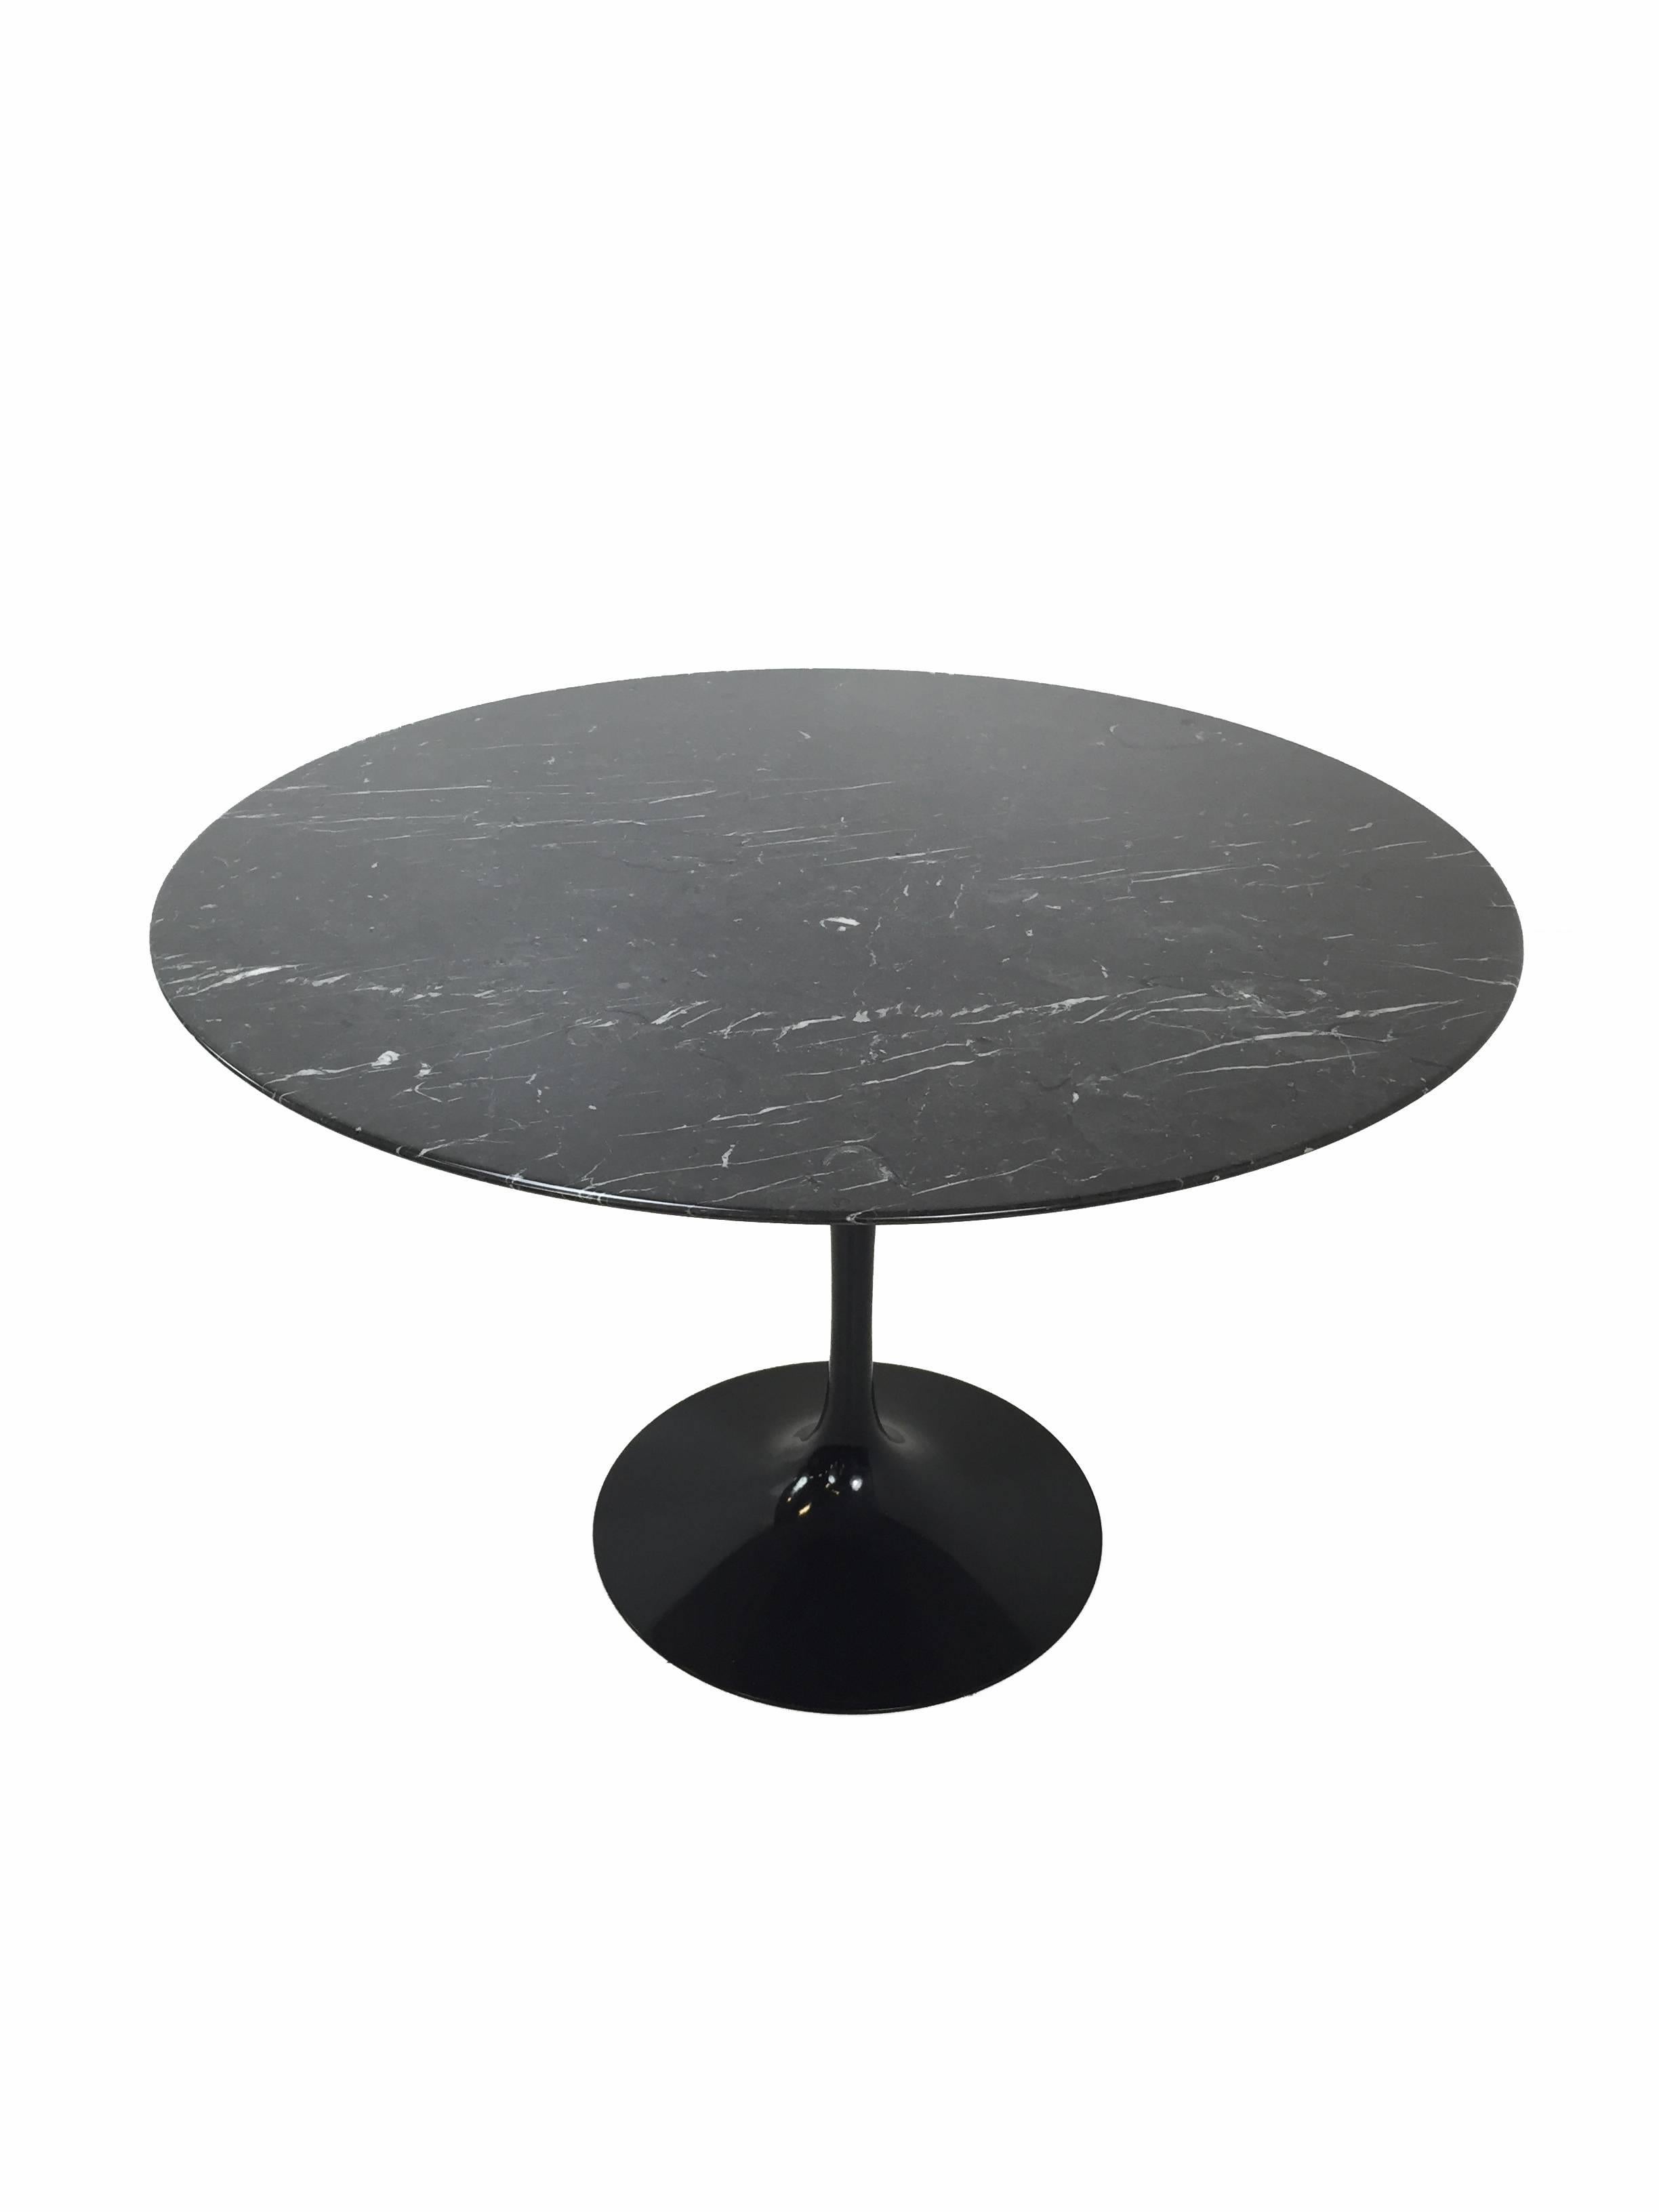 Contemporary production Nero Marquina marble on a black base. Knoll studio 42